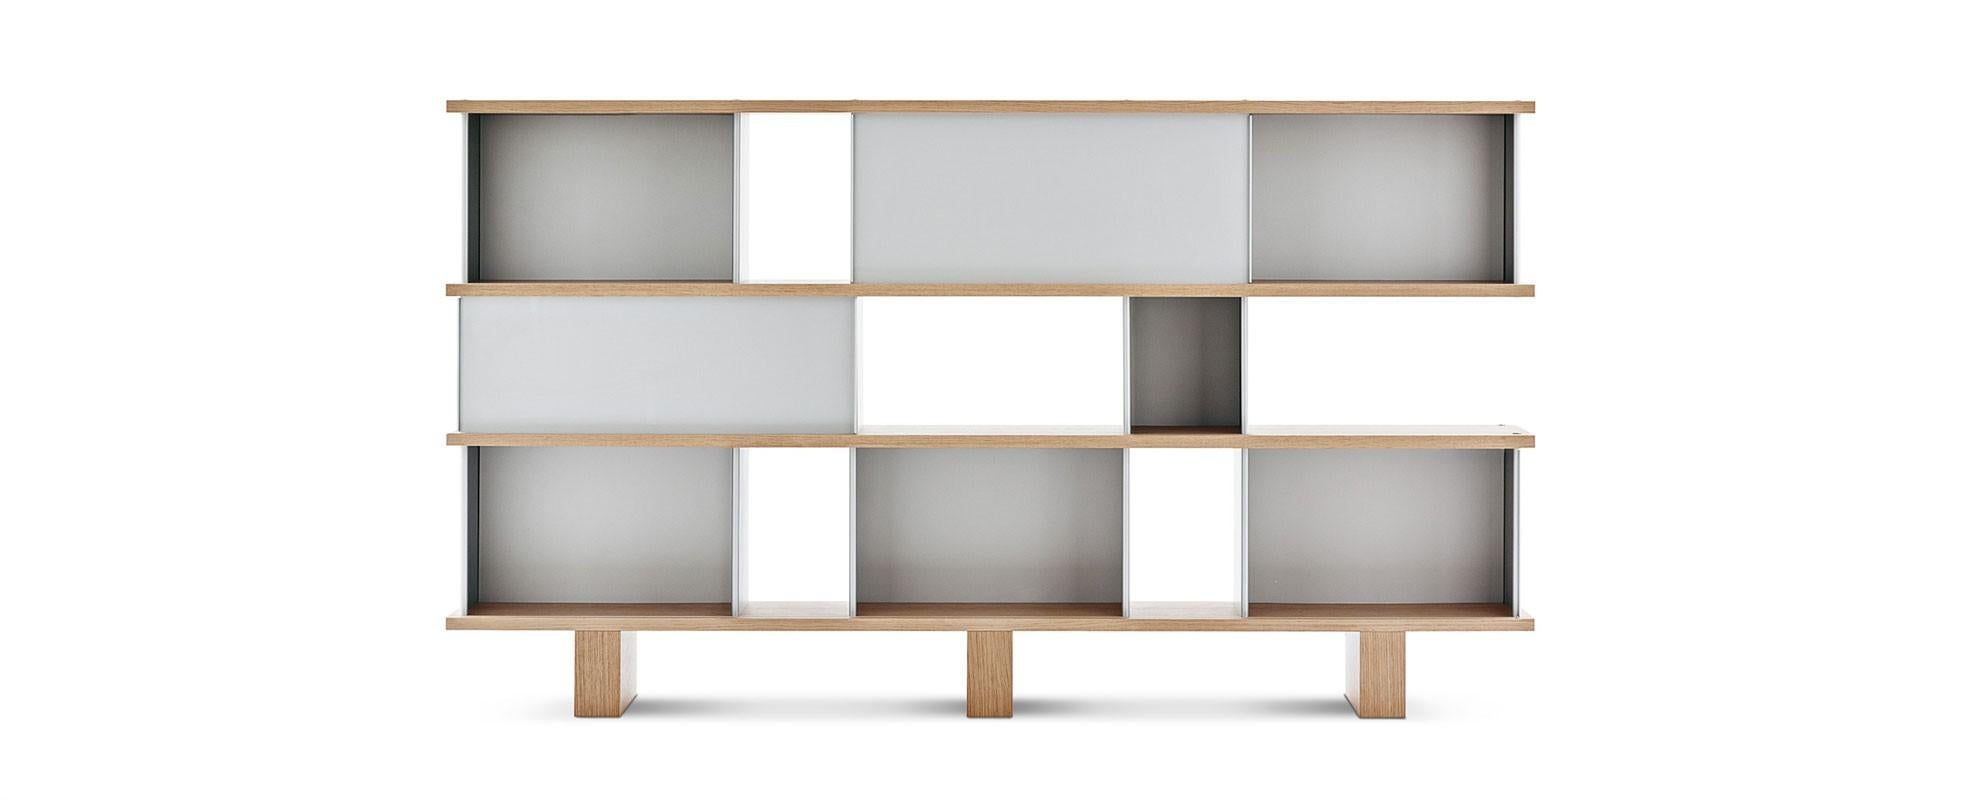 Charlotte Perriand Mid-Century Modern Nuage Shelving Unit by Cassina In New Condition For Sale In Barcelona, Barcelona